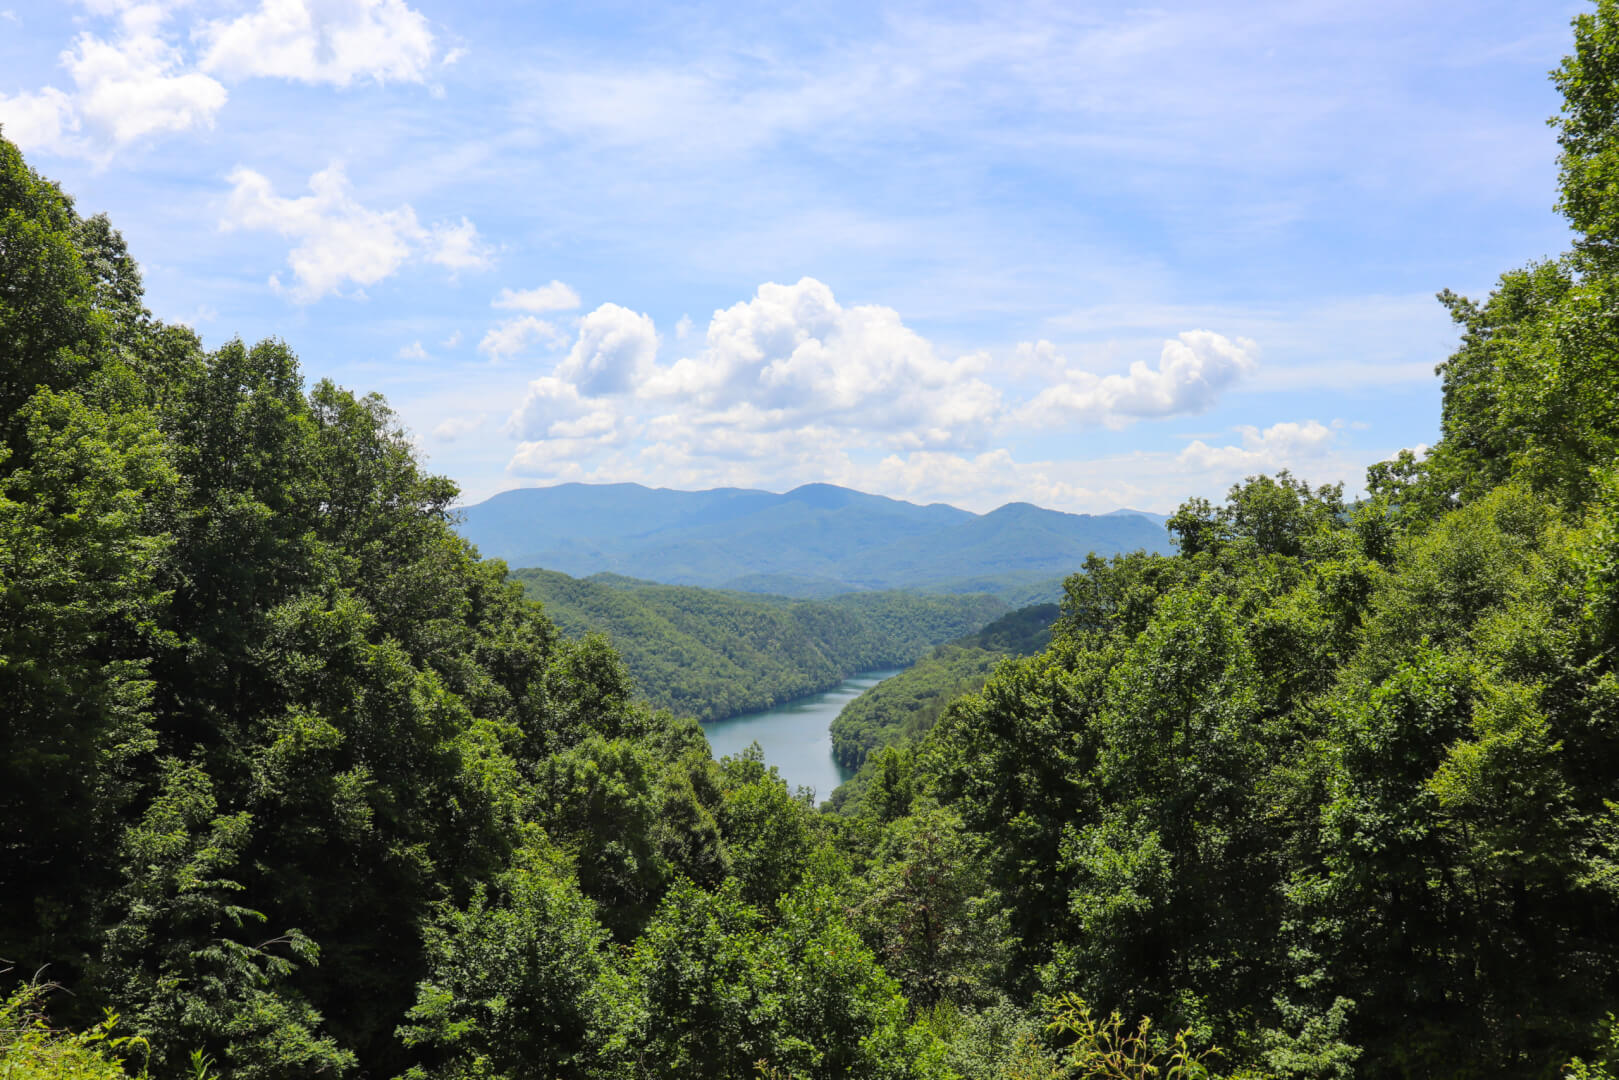 The Best Outdoor Day Trip Itinerary for Bryson City, NC